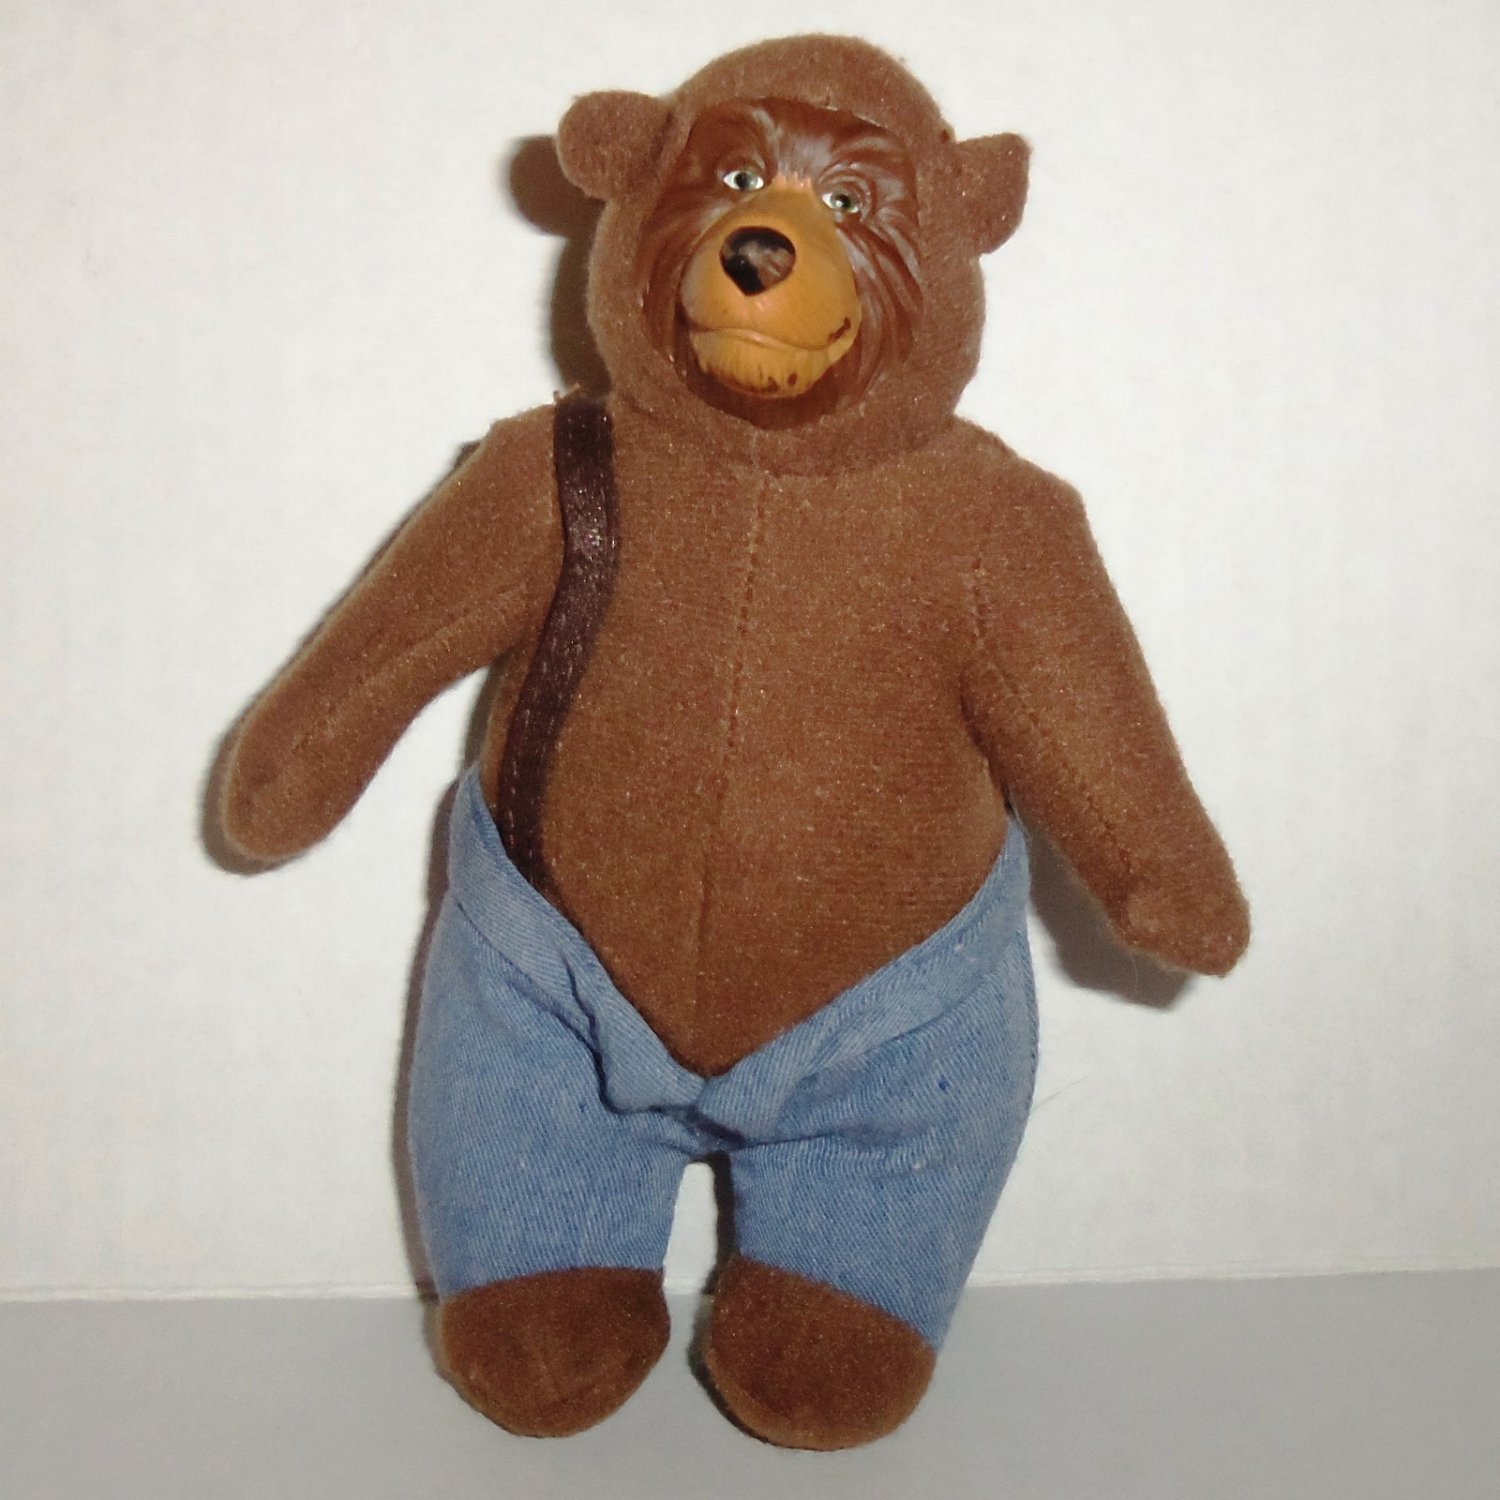 2001-2002 Disney's The Country Bears McDonalds Toy Fred Bedderhead #8